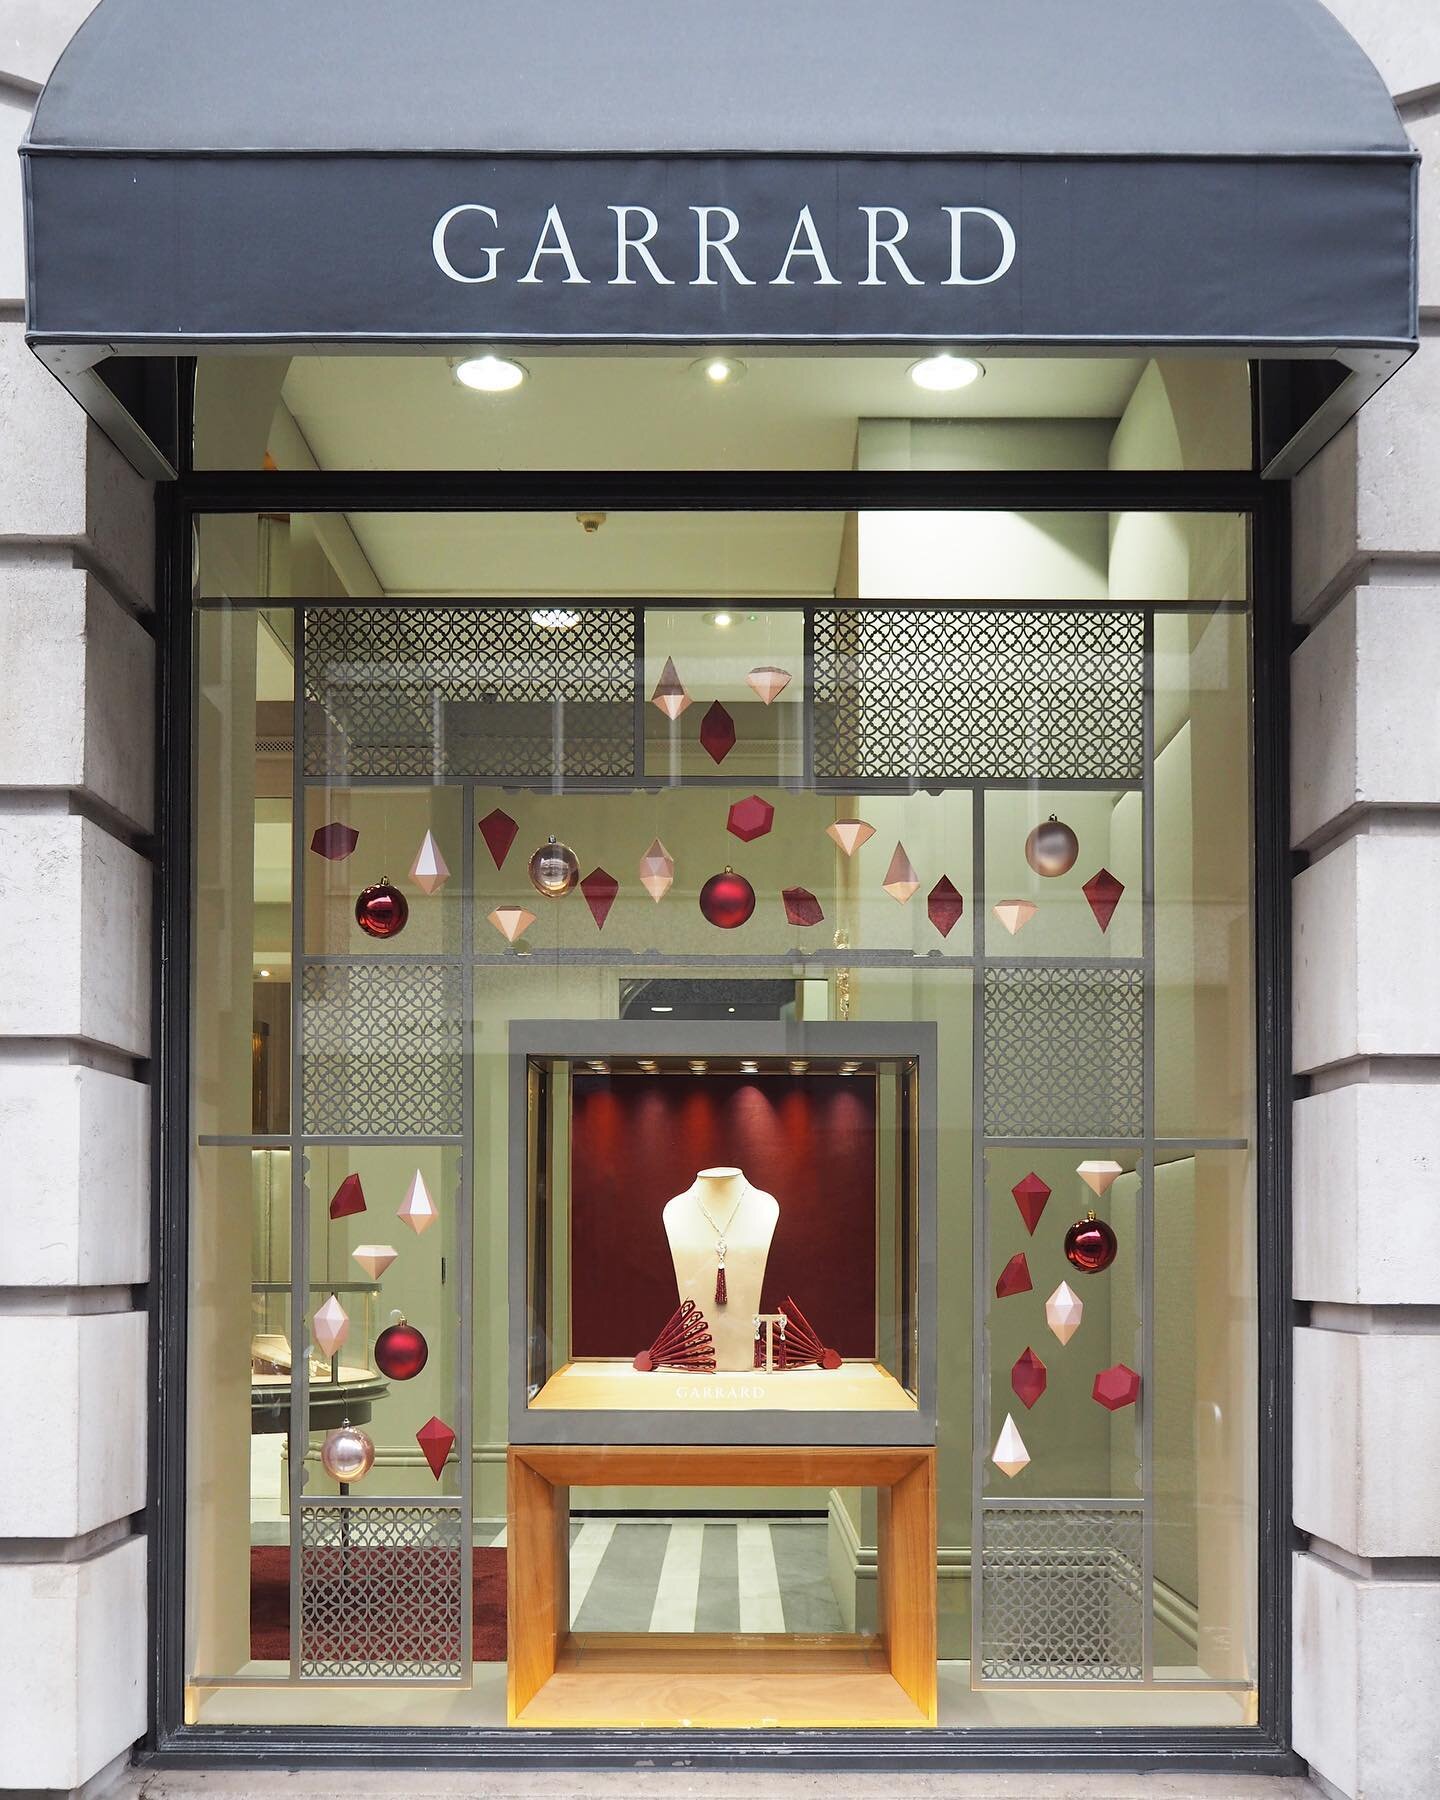 One of the seven flagship window displays that we had the pleasure of designing, producing and installing for House of Garrard this festive season.